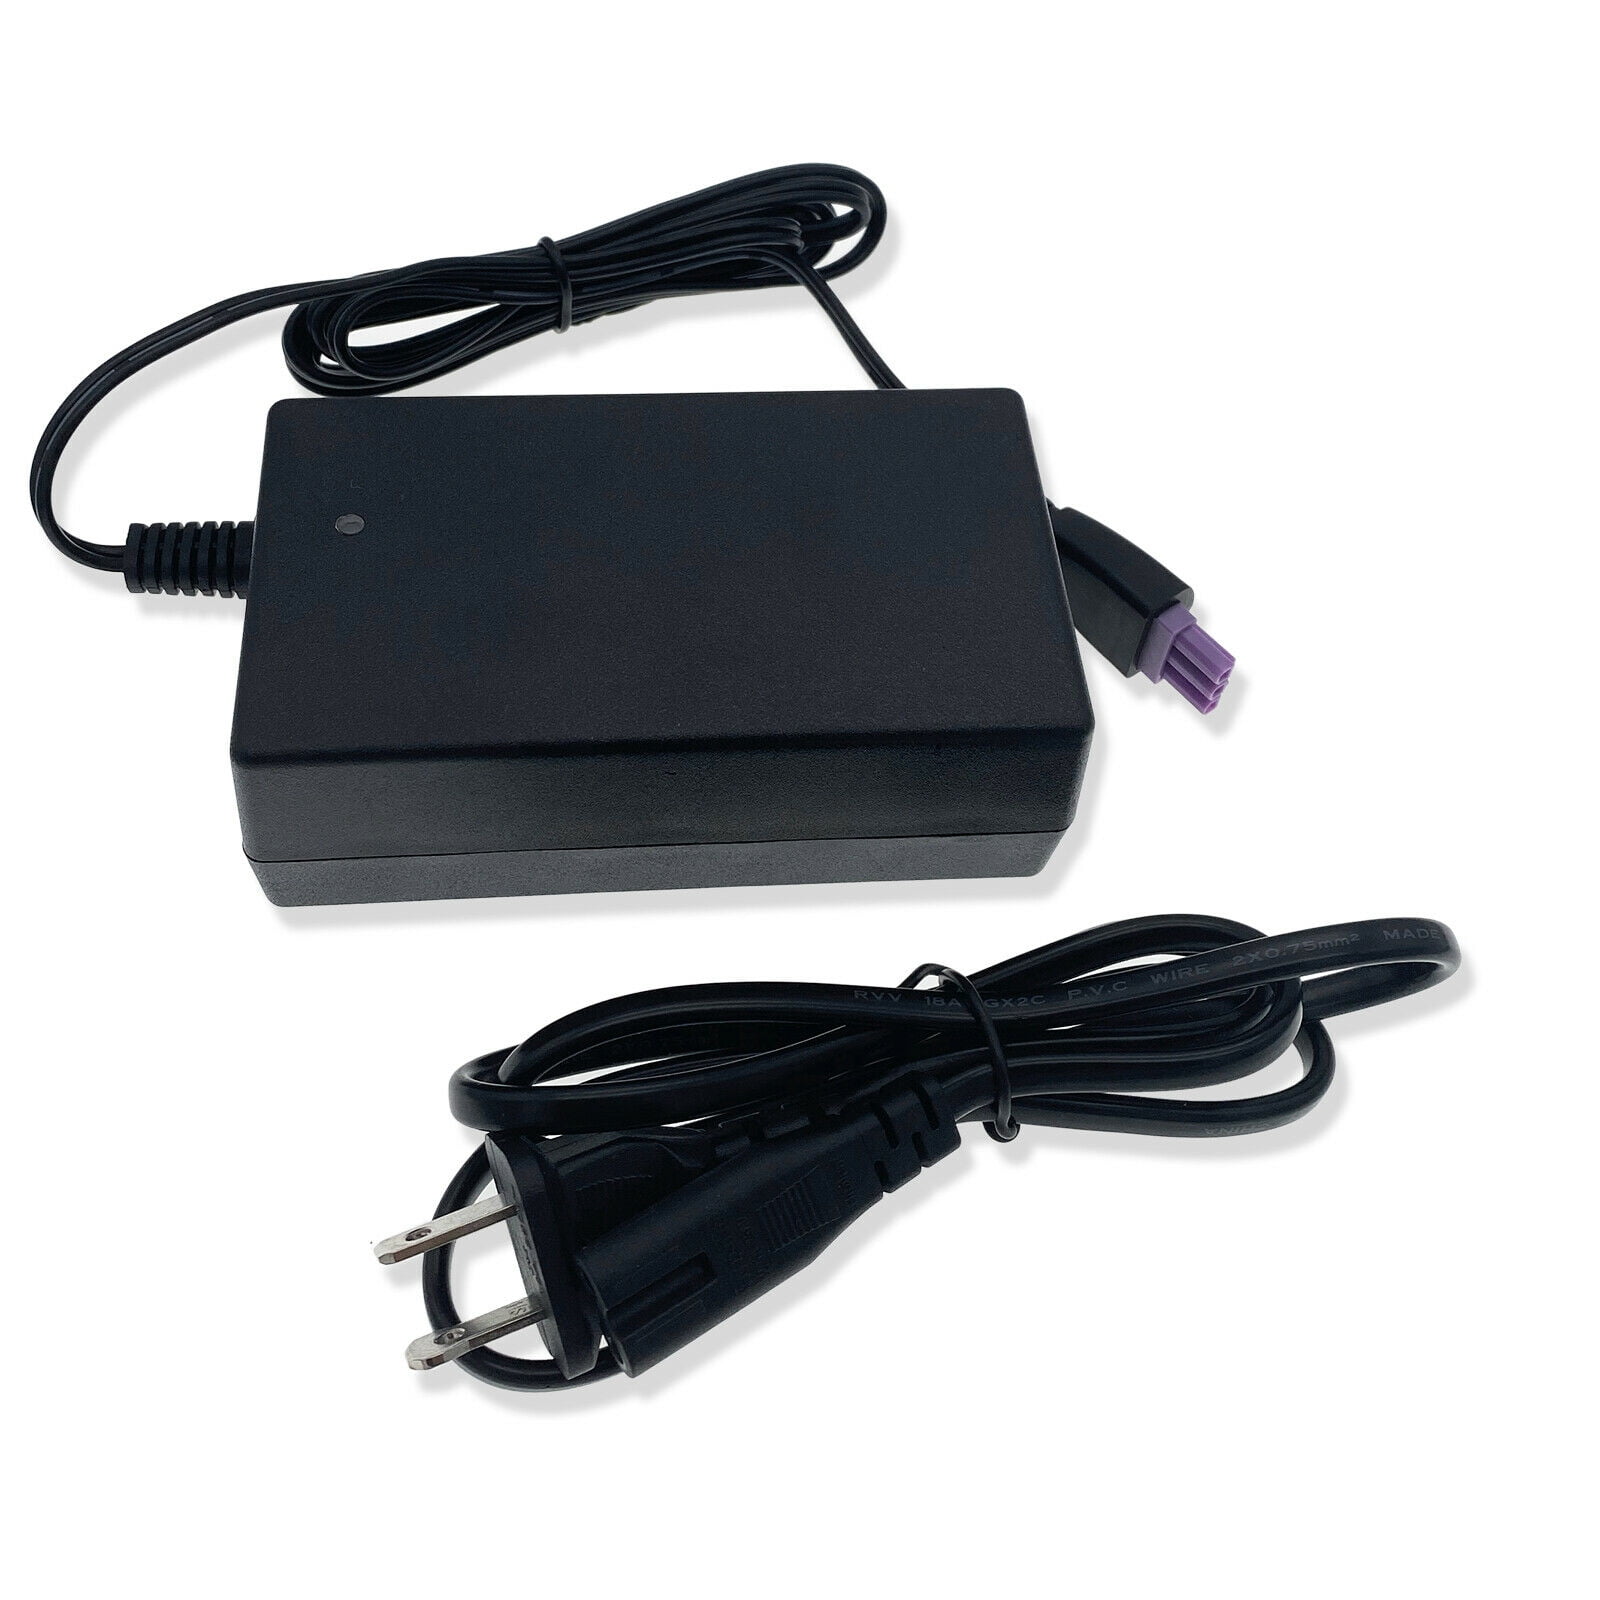 Generic AC Adapter Charger For HP Photosmart C6180 C7180 Printer Power Cord PSU 